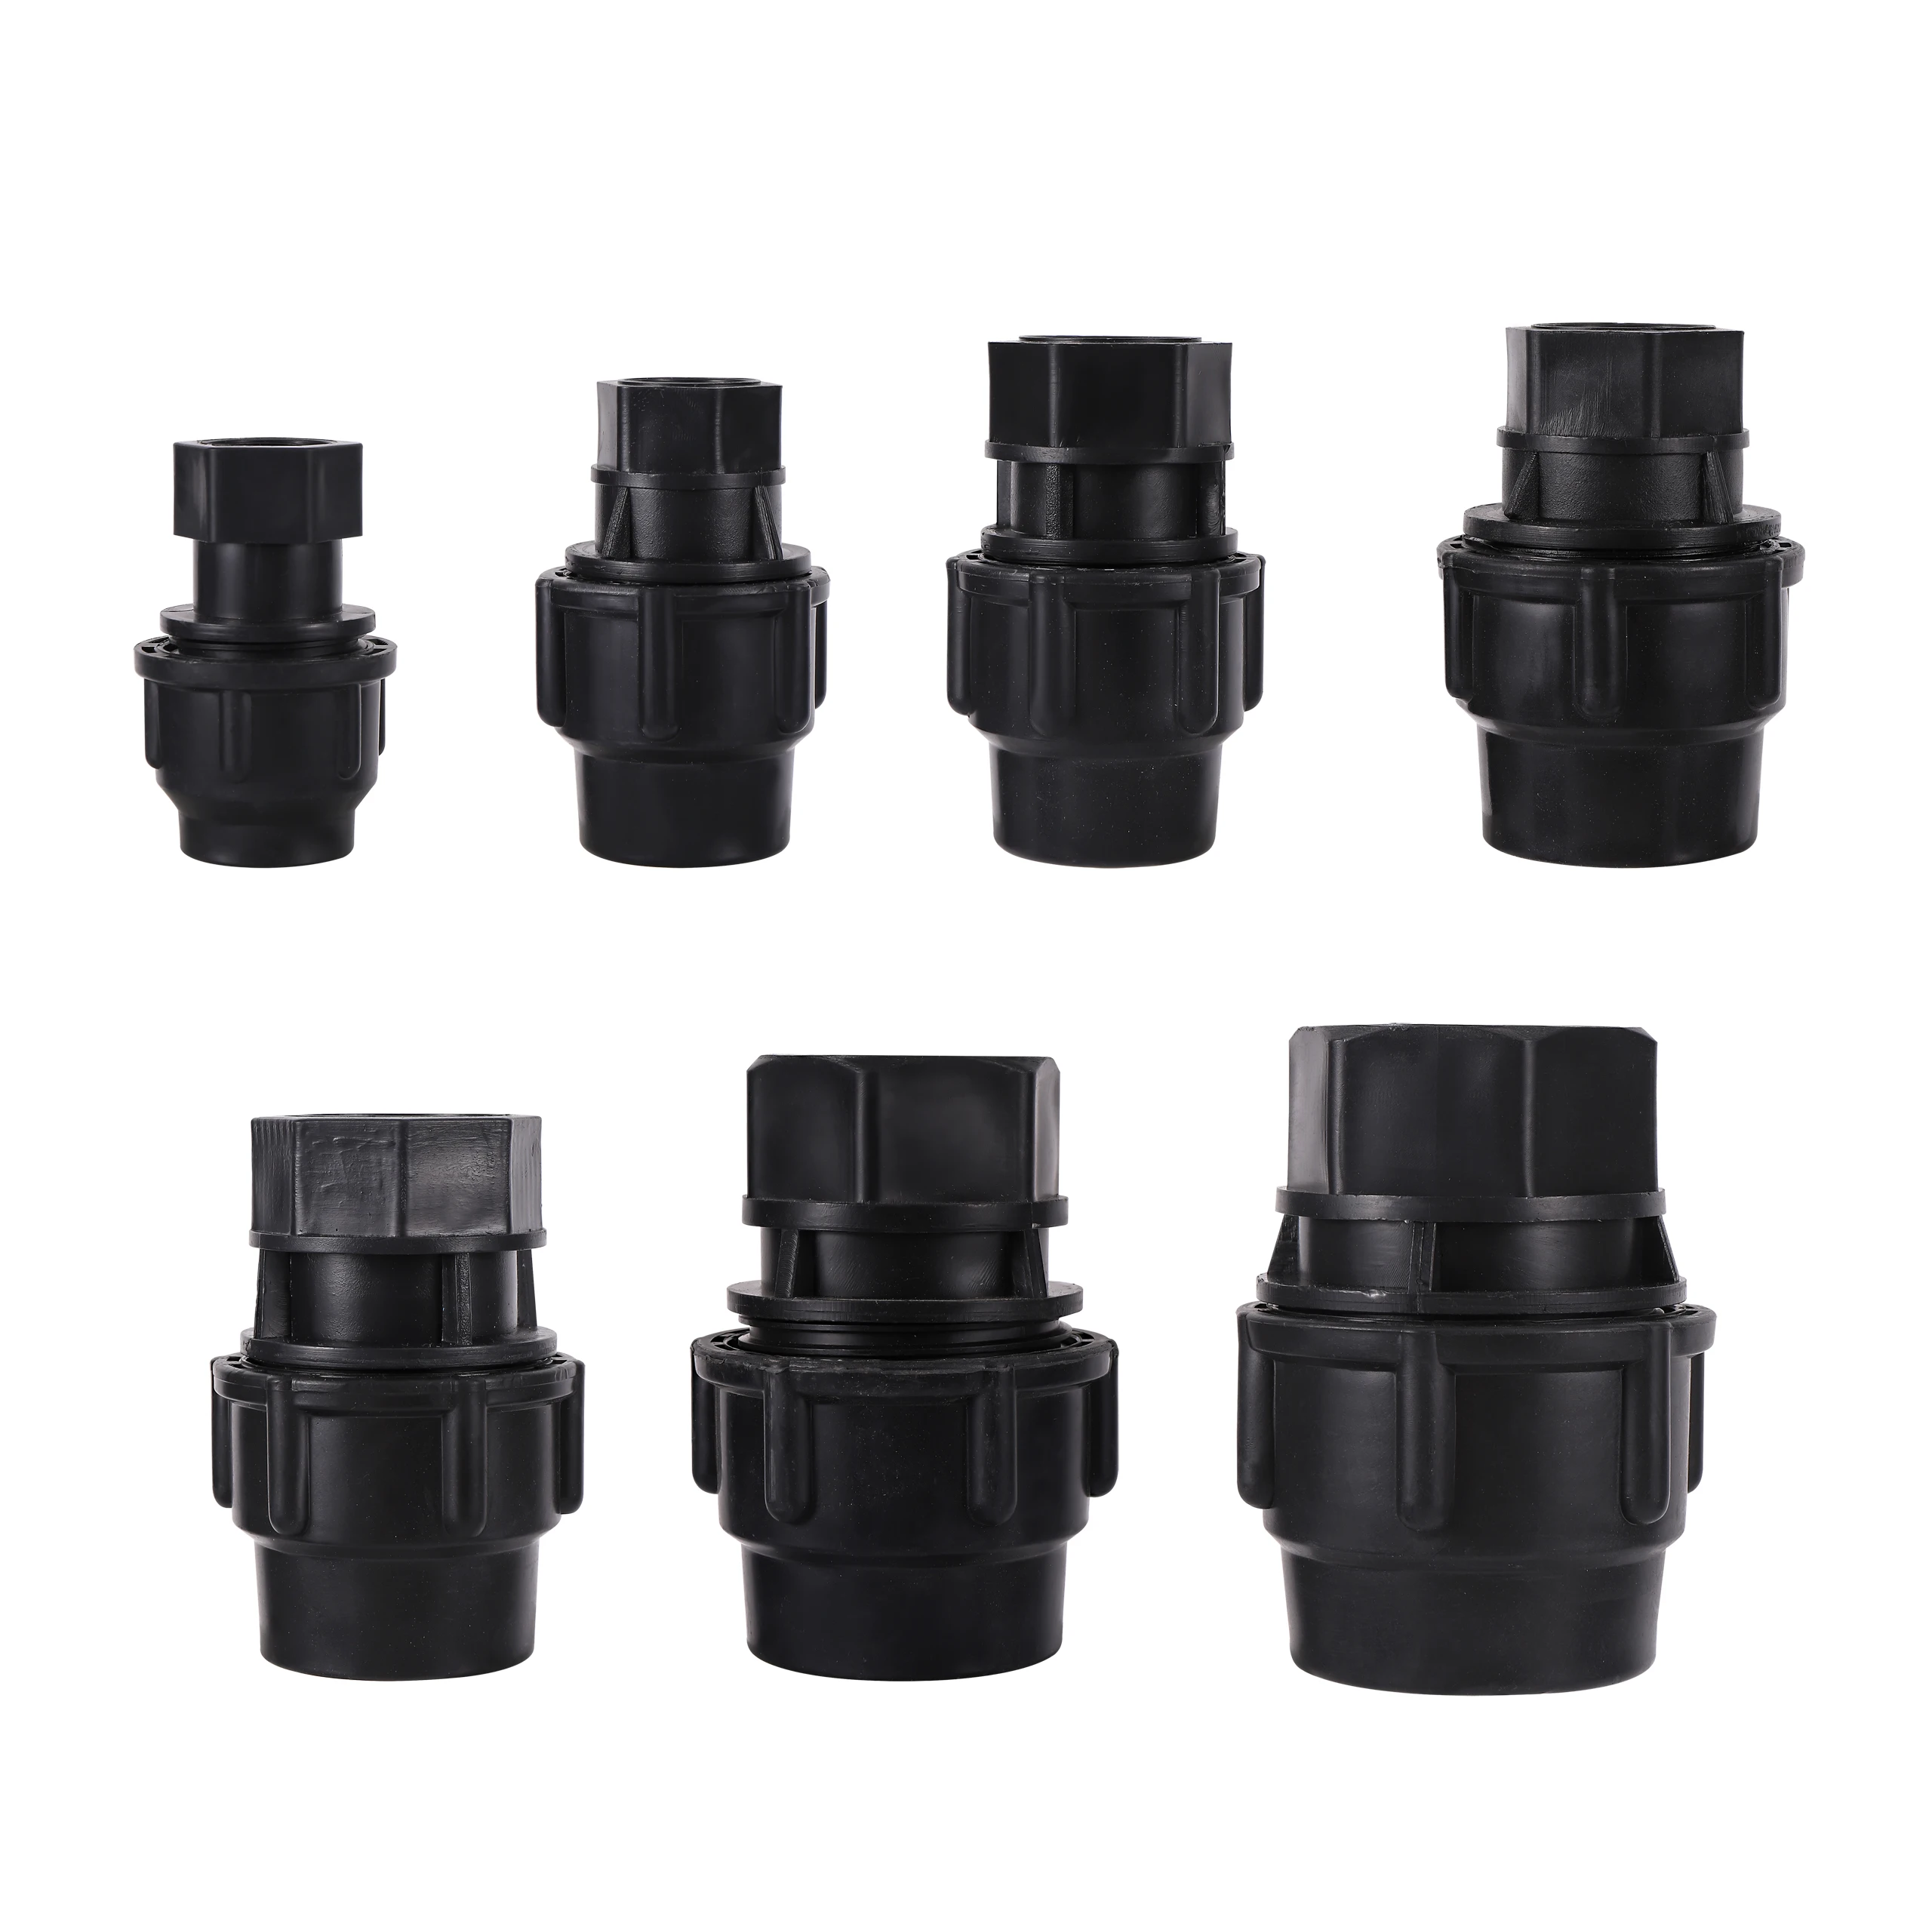 Tripod Impulse with quick connector for Sprinkler Pulsating Telescopic Watering Lawn Garden 1/2" Female thread connector 1 Pc